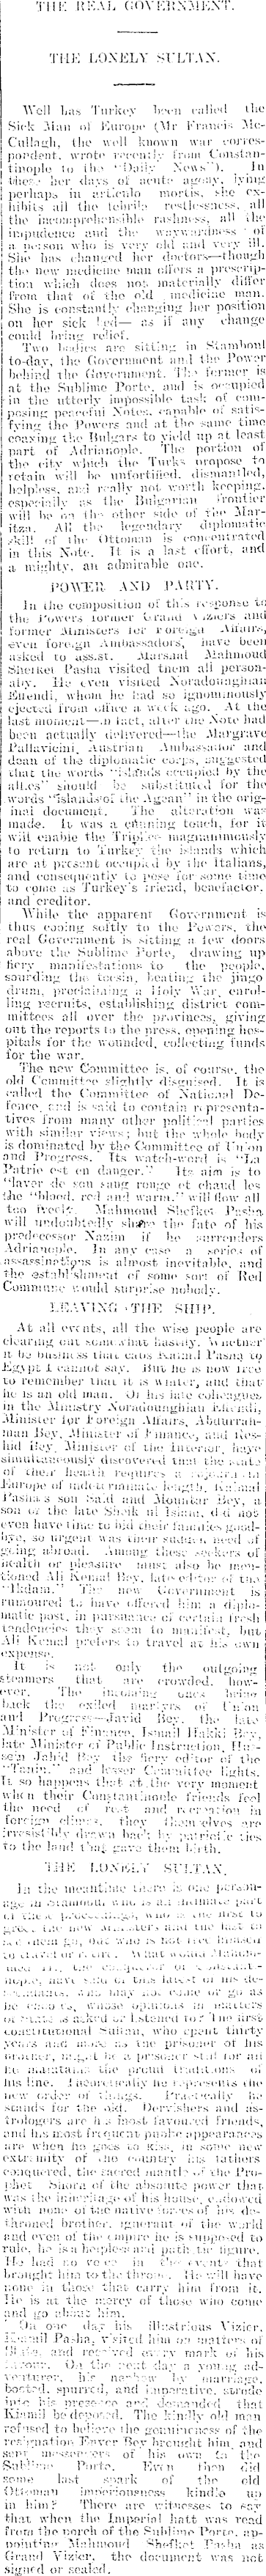 Papers Past Newspapers Timaru Herald March 1913 The Last Days Of Stambuul